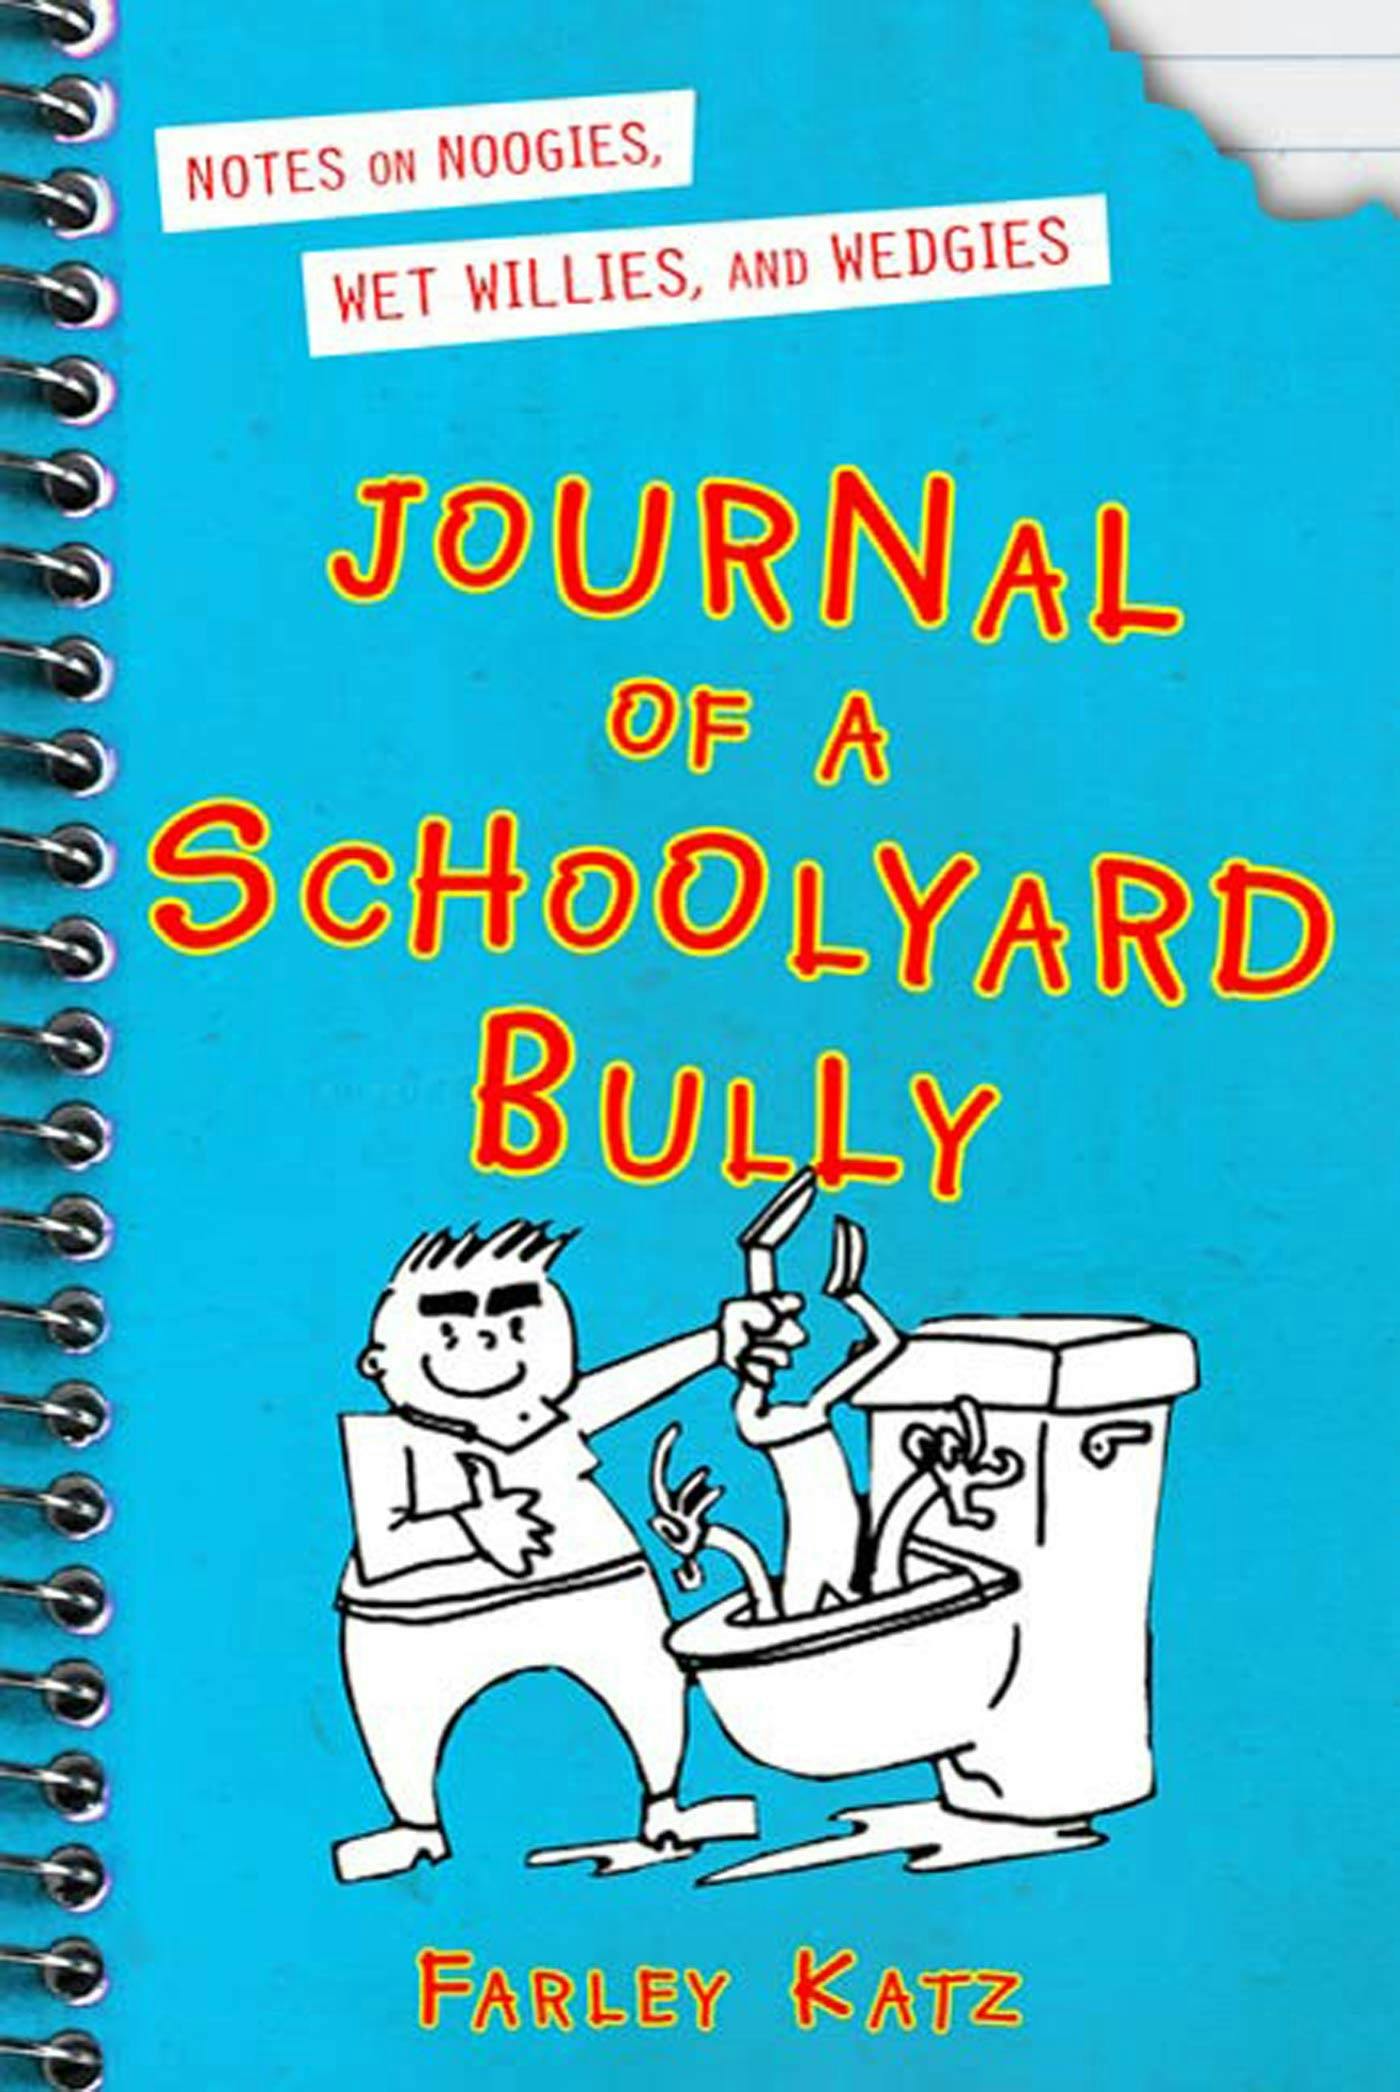 Image of Journal of a Schoolyard Bully